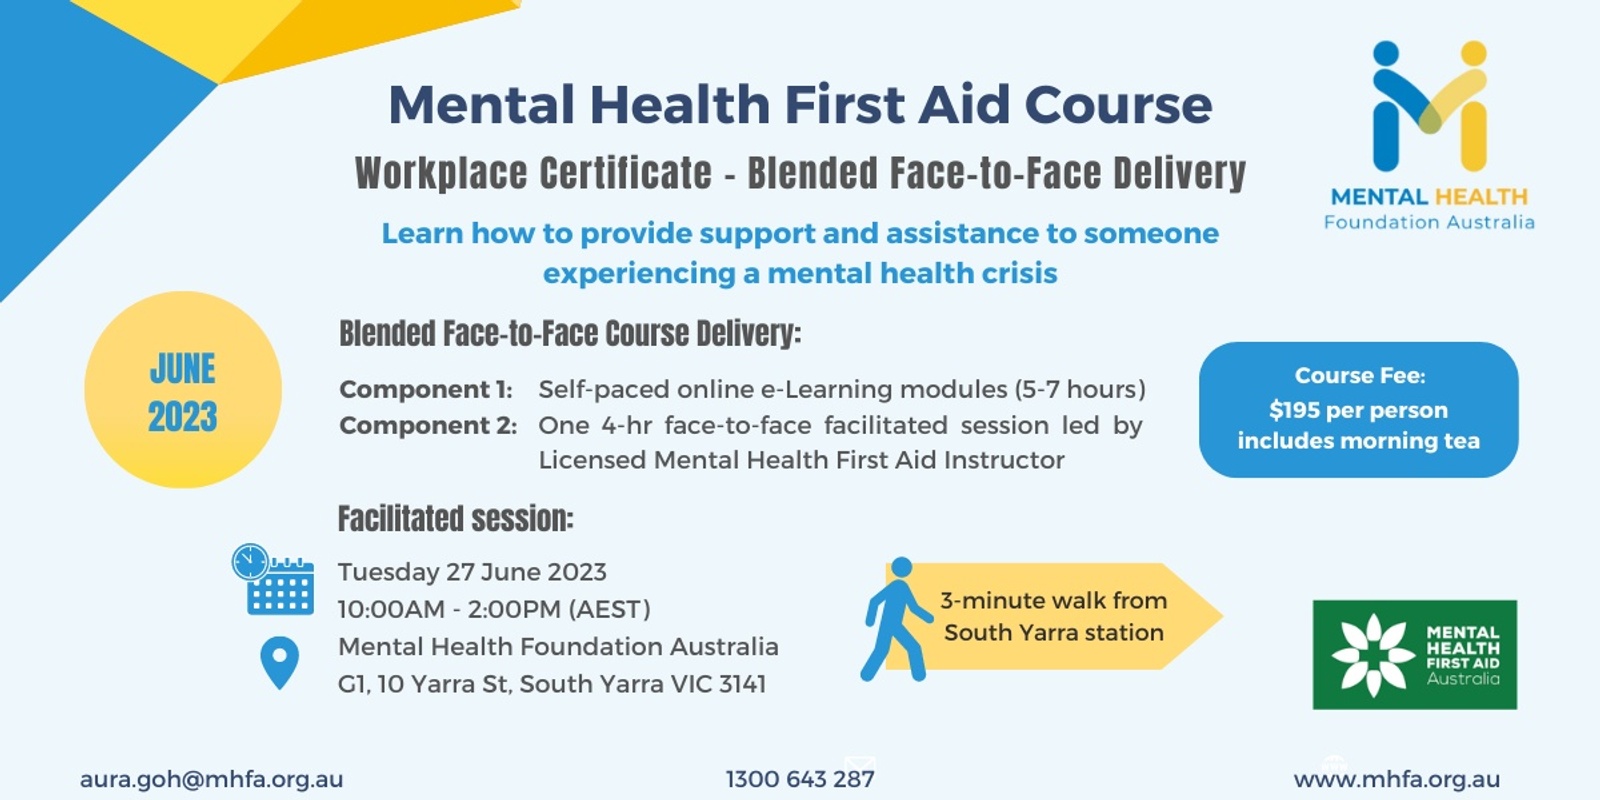 Blended Face-to-Face Mental Health First Aid course (Workplace Certificate) - June 2023